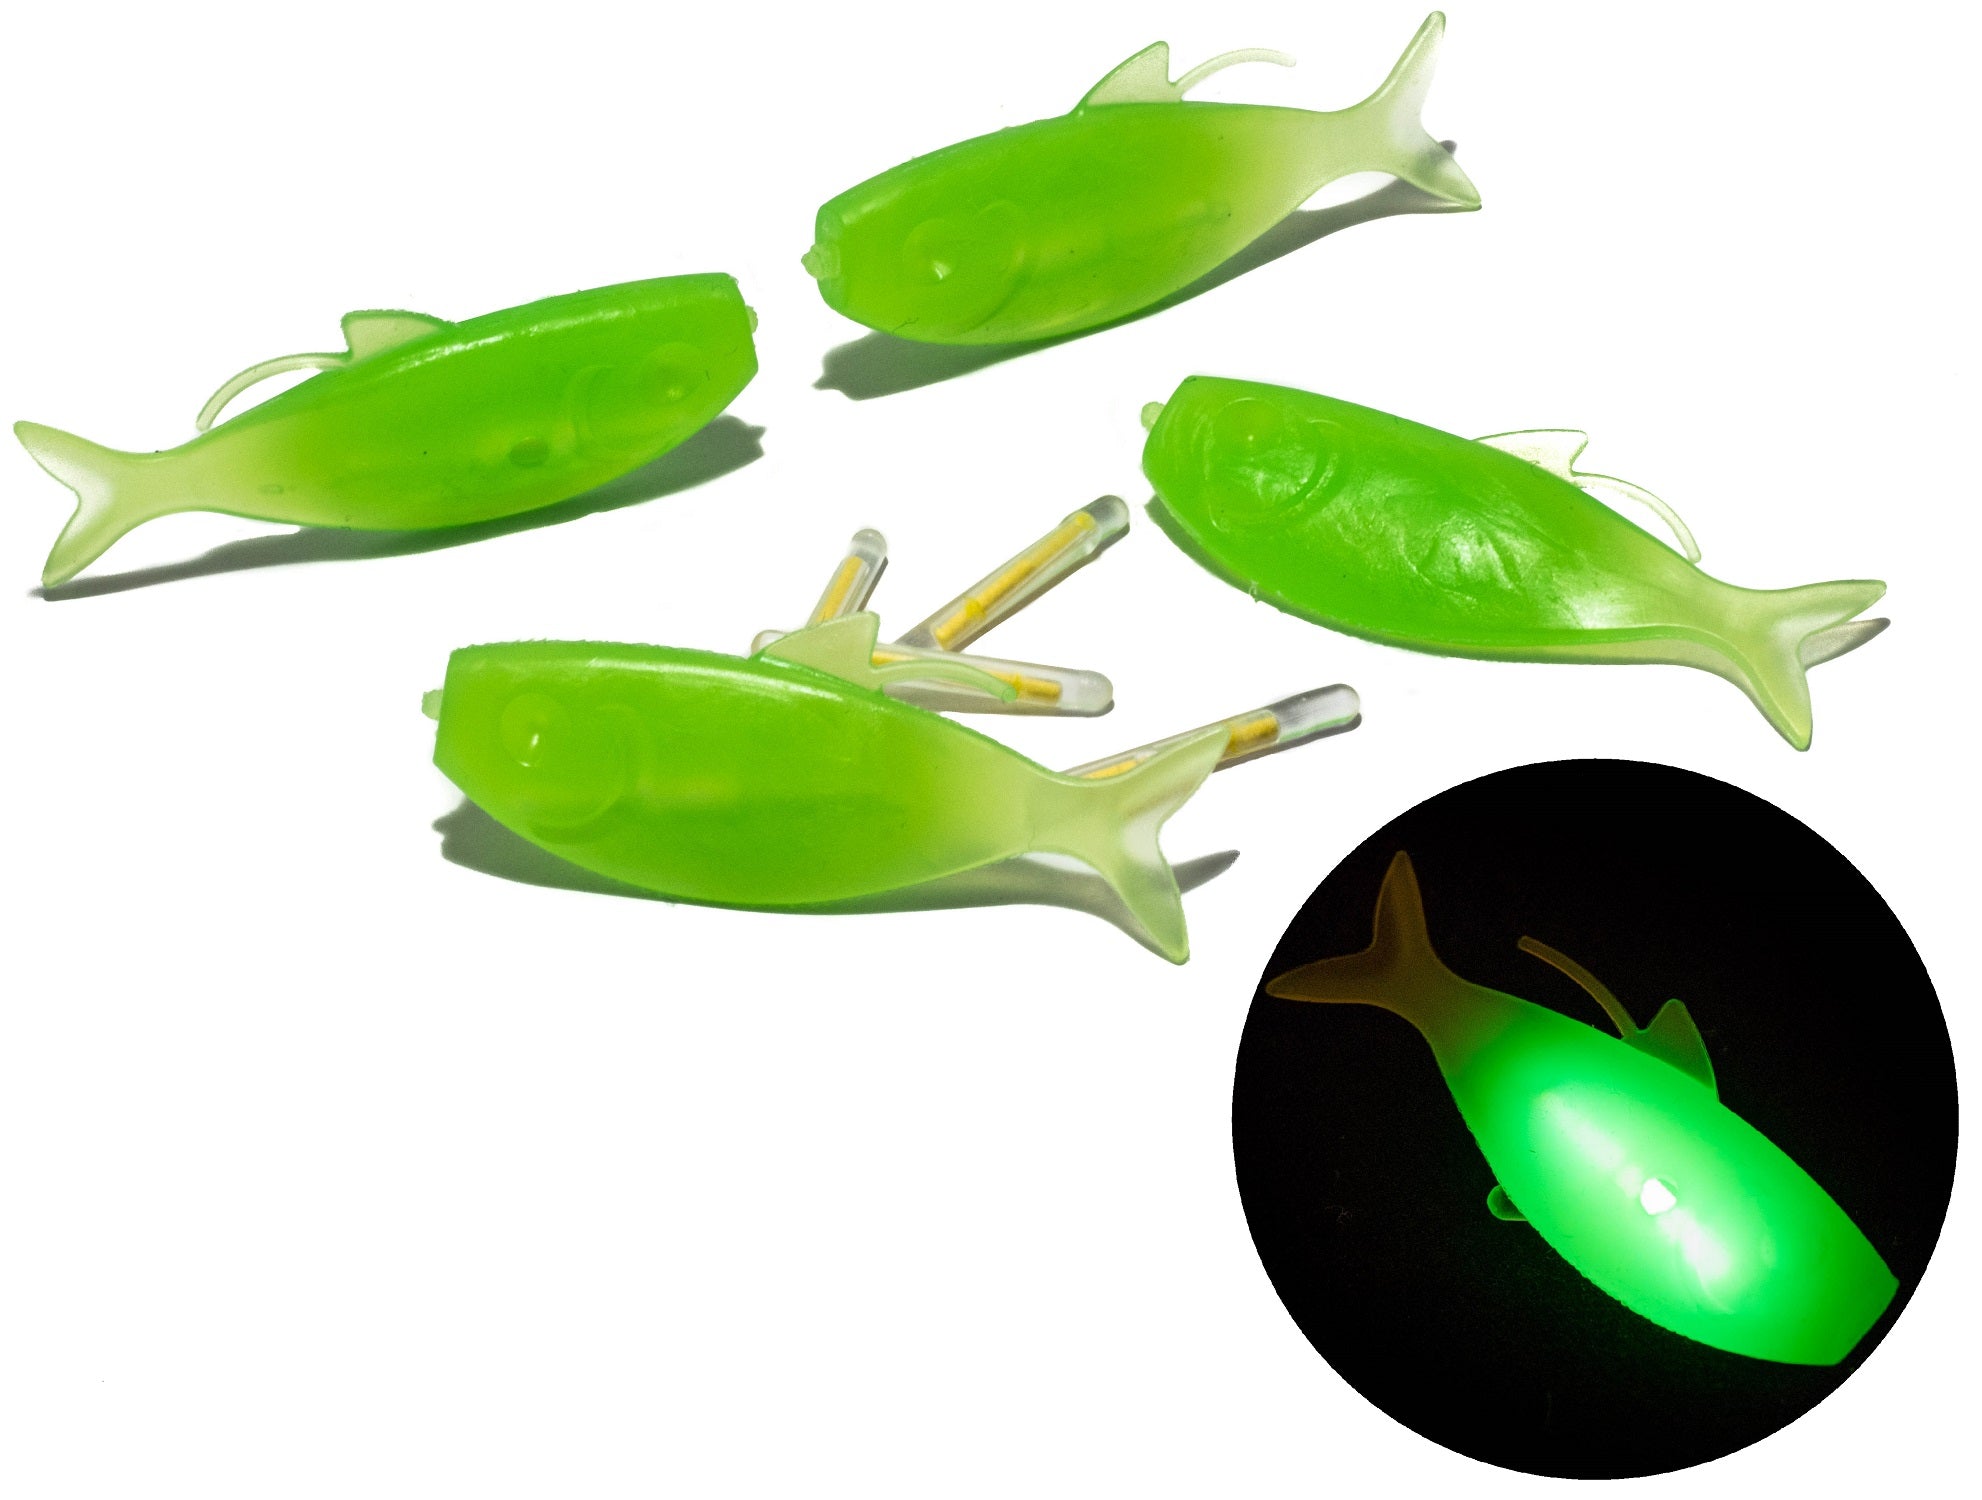 Fishing Shads 1.8” long (4 pack) - Glows in the dark, Soft plastic,  Internal scent pocket.